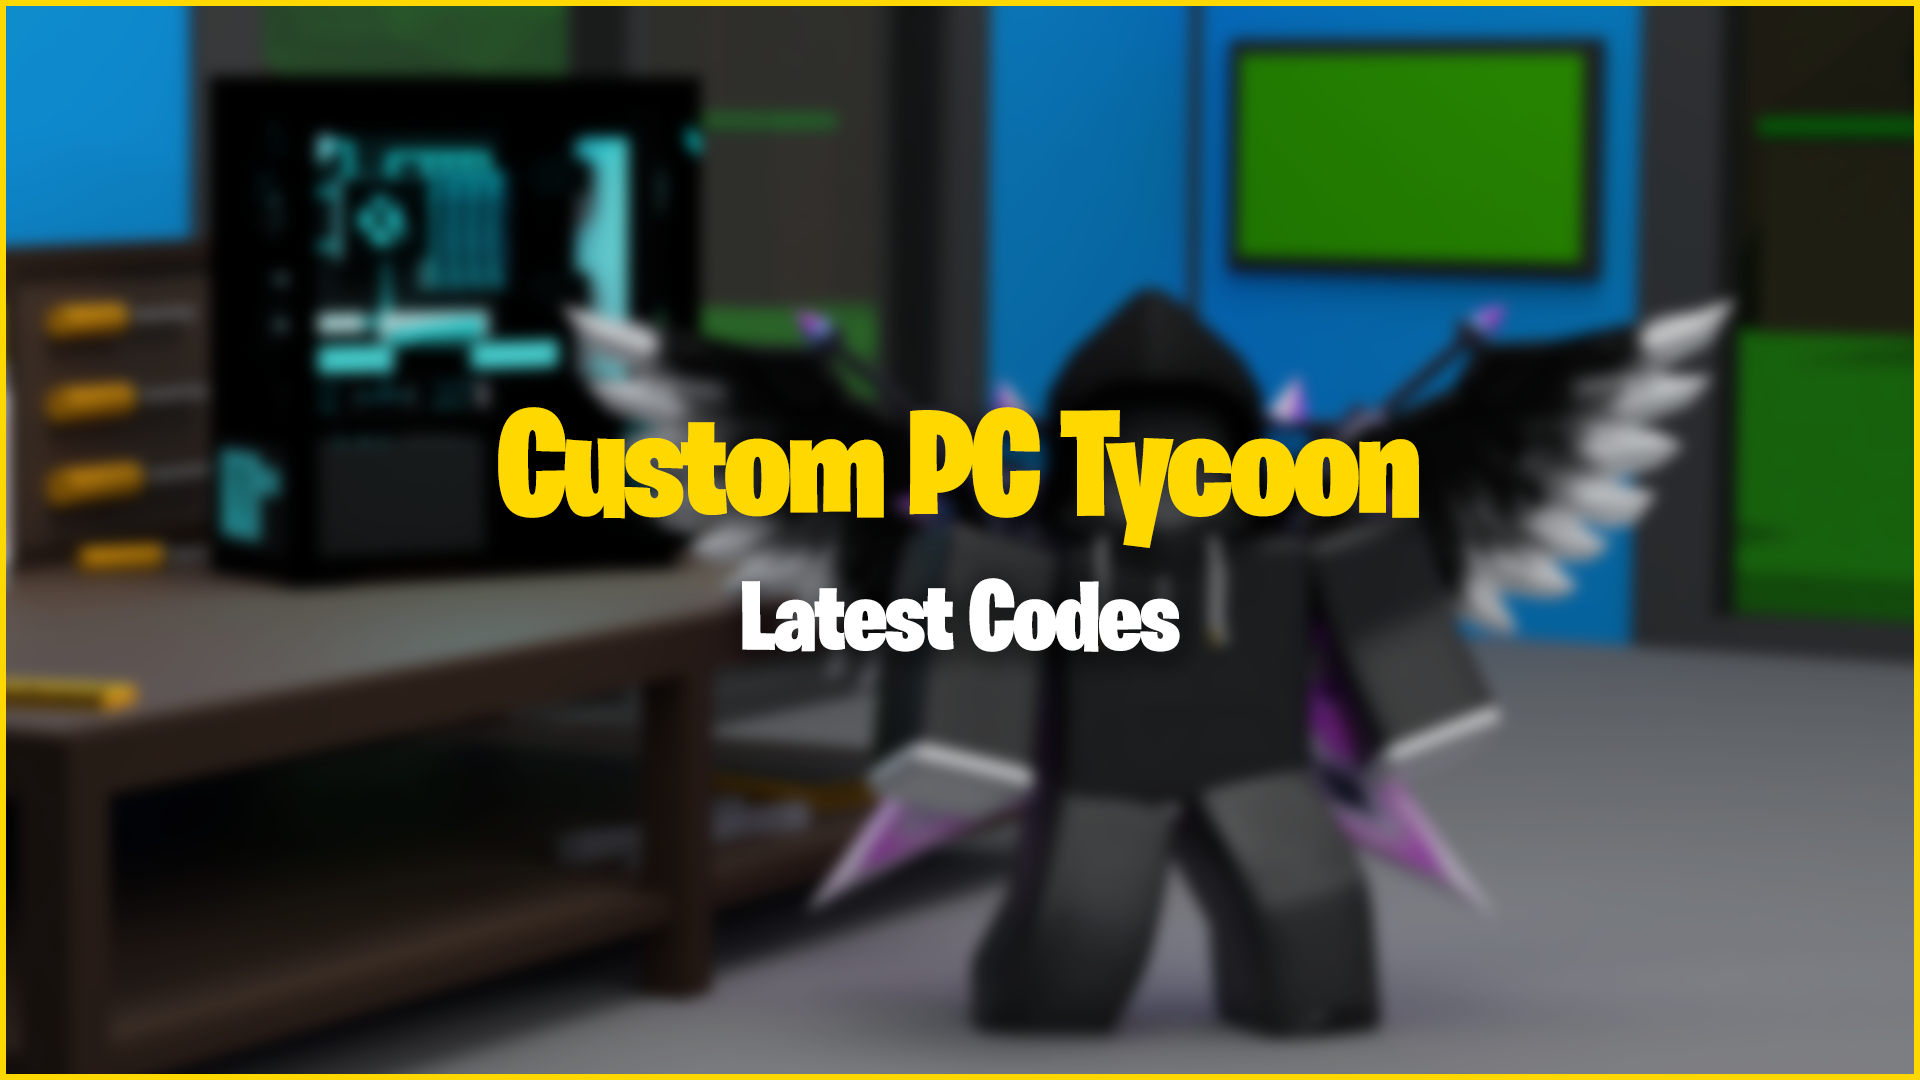 Roblox Custom PC Tycoon promo codes for April 2022 Free Parts and Cash